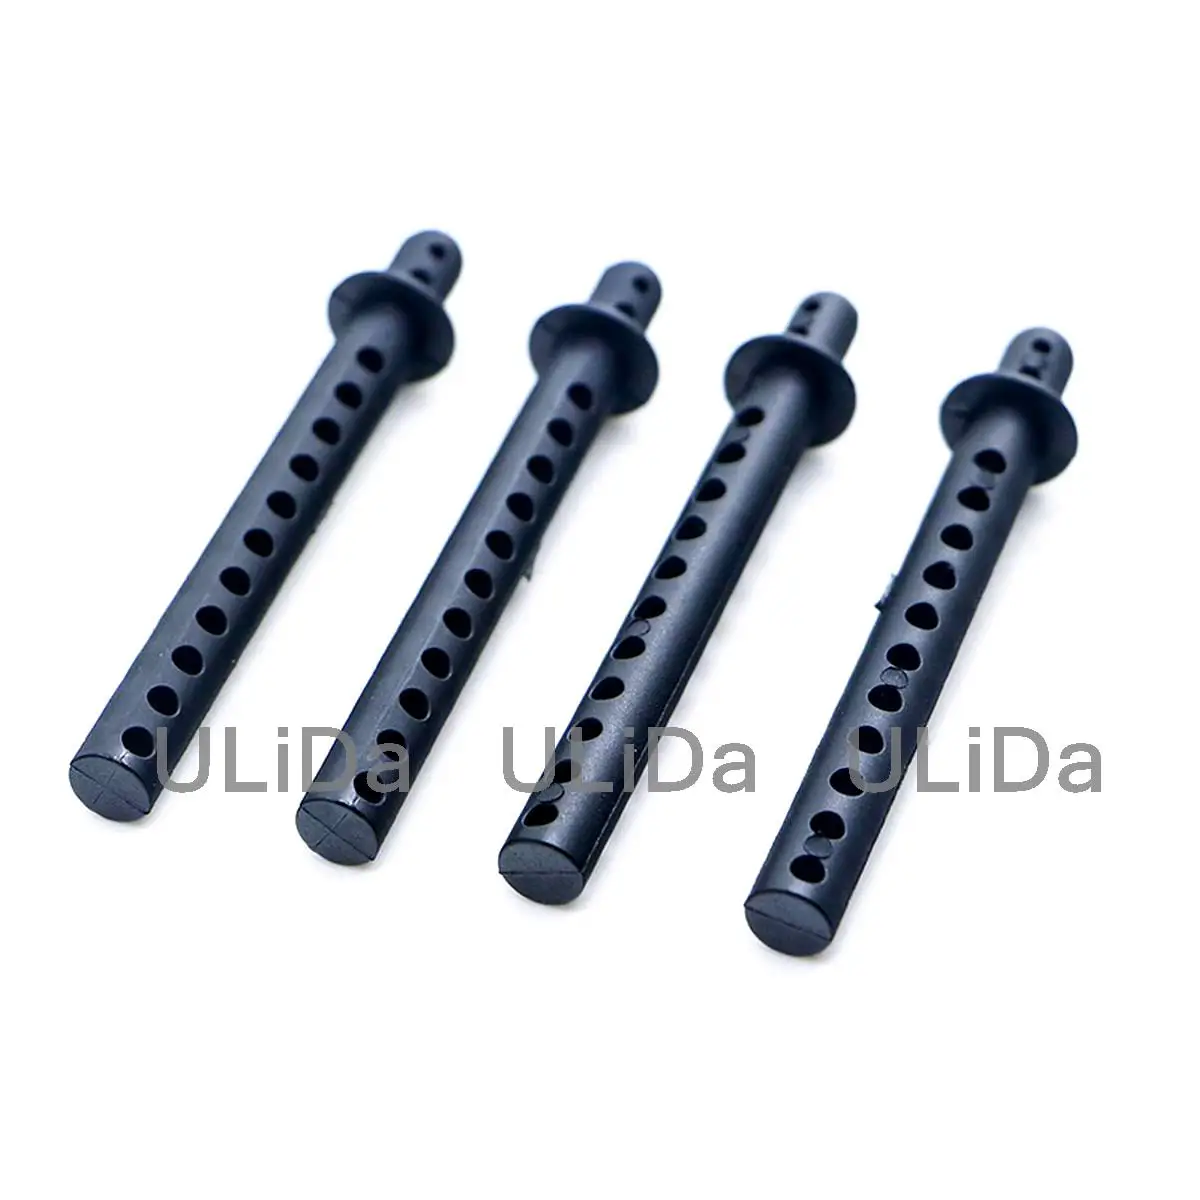 

4pcs 37011 Plastic Body Post For HSP 1/10th 94170 94155 4WD Electric Power R/C Off-Road Truggy